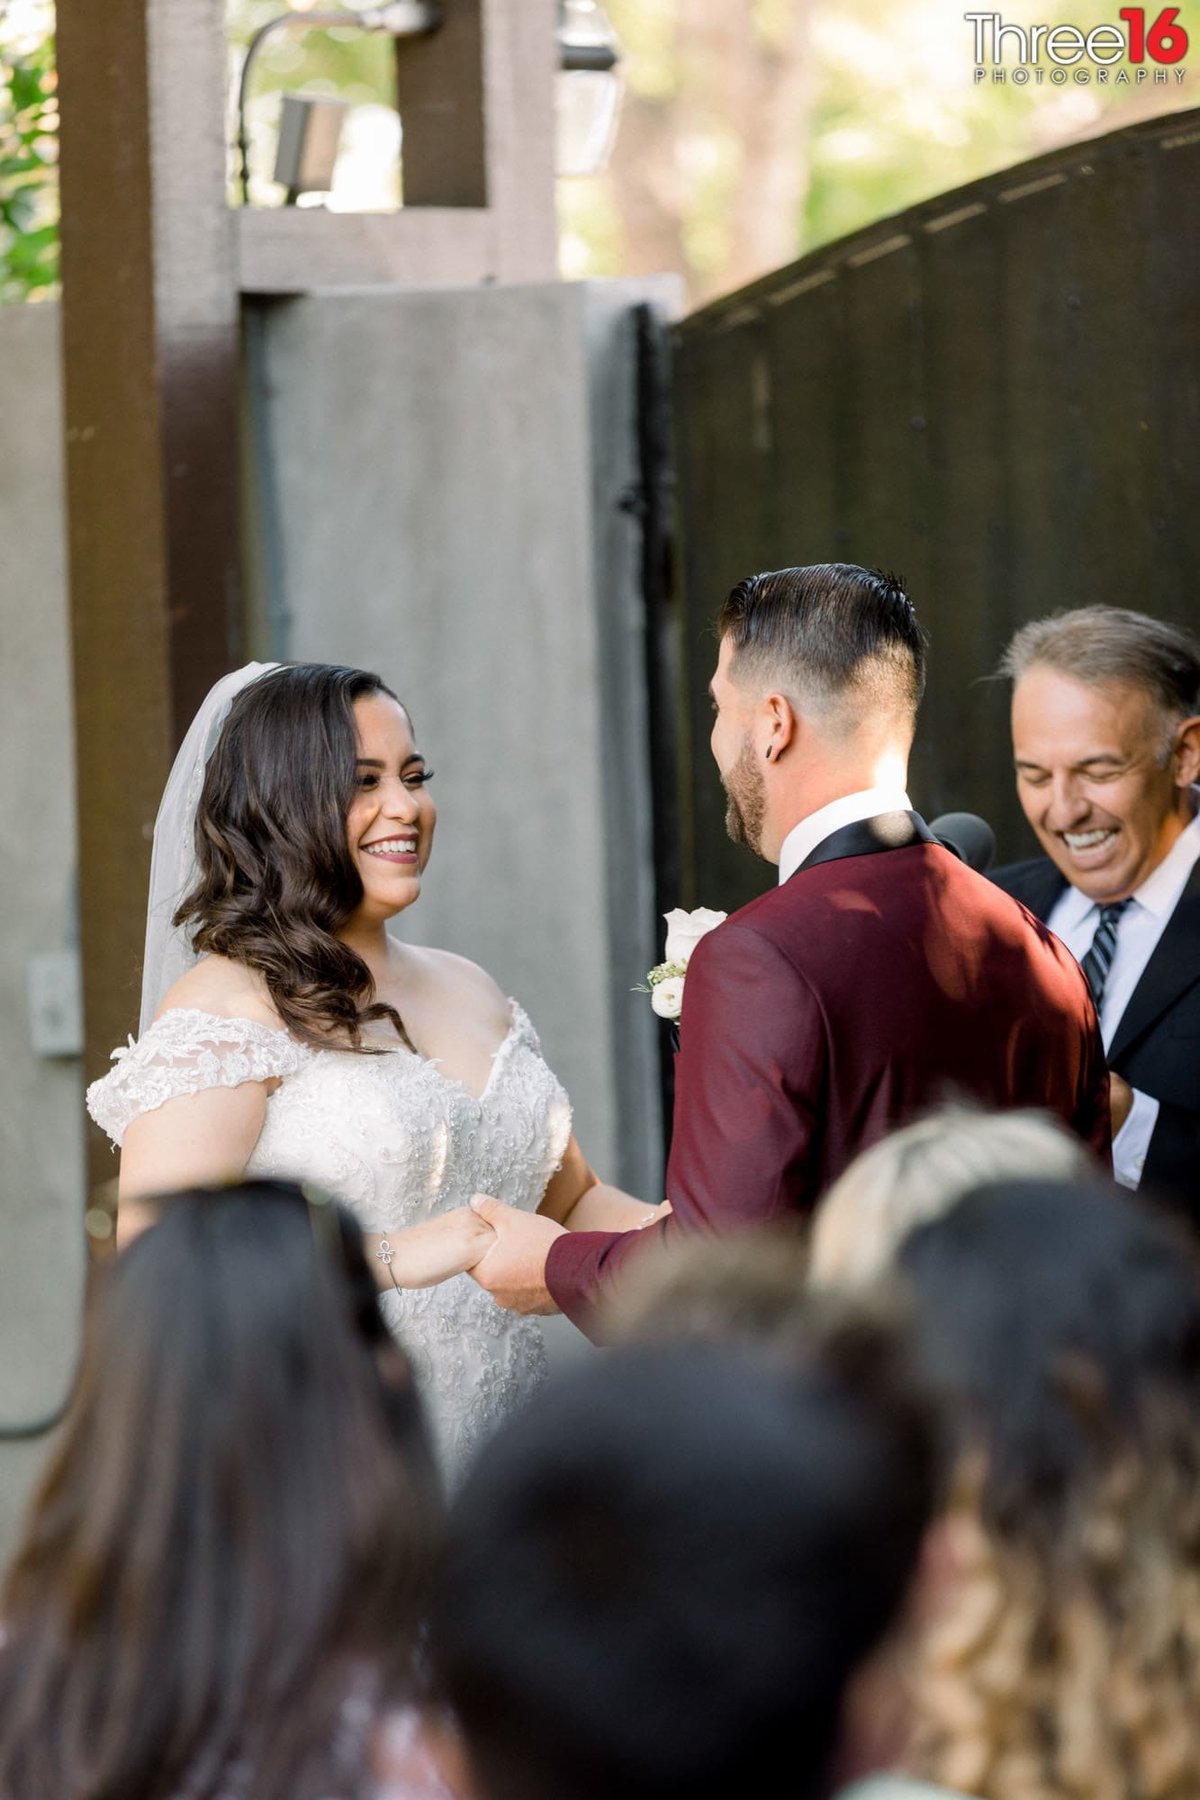 Bride, Groom and Officiant all share in a laugh together during the ceremony